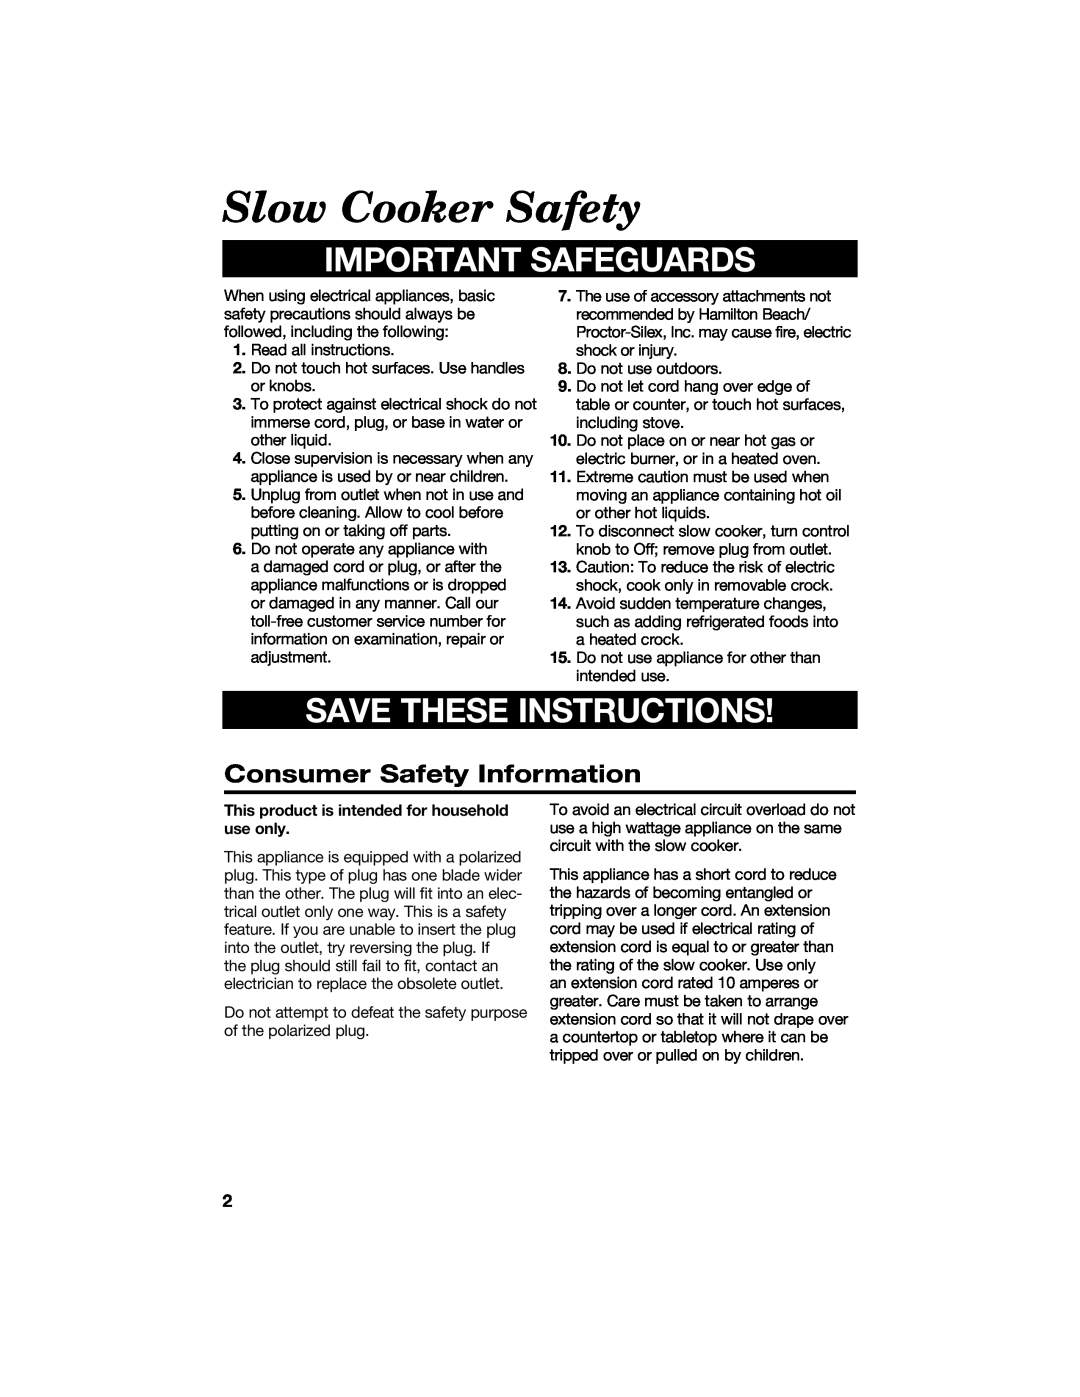 Hamilton Beach 840071200 Slow Cooker Safety, Consumer Safety Information, Important Safeguards, Save These Instructions 